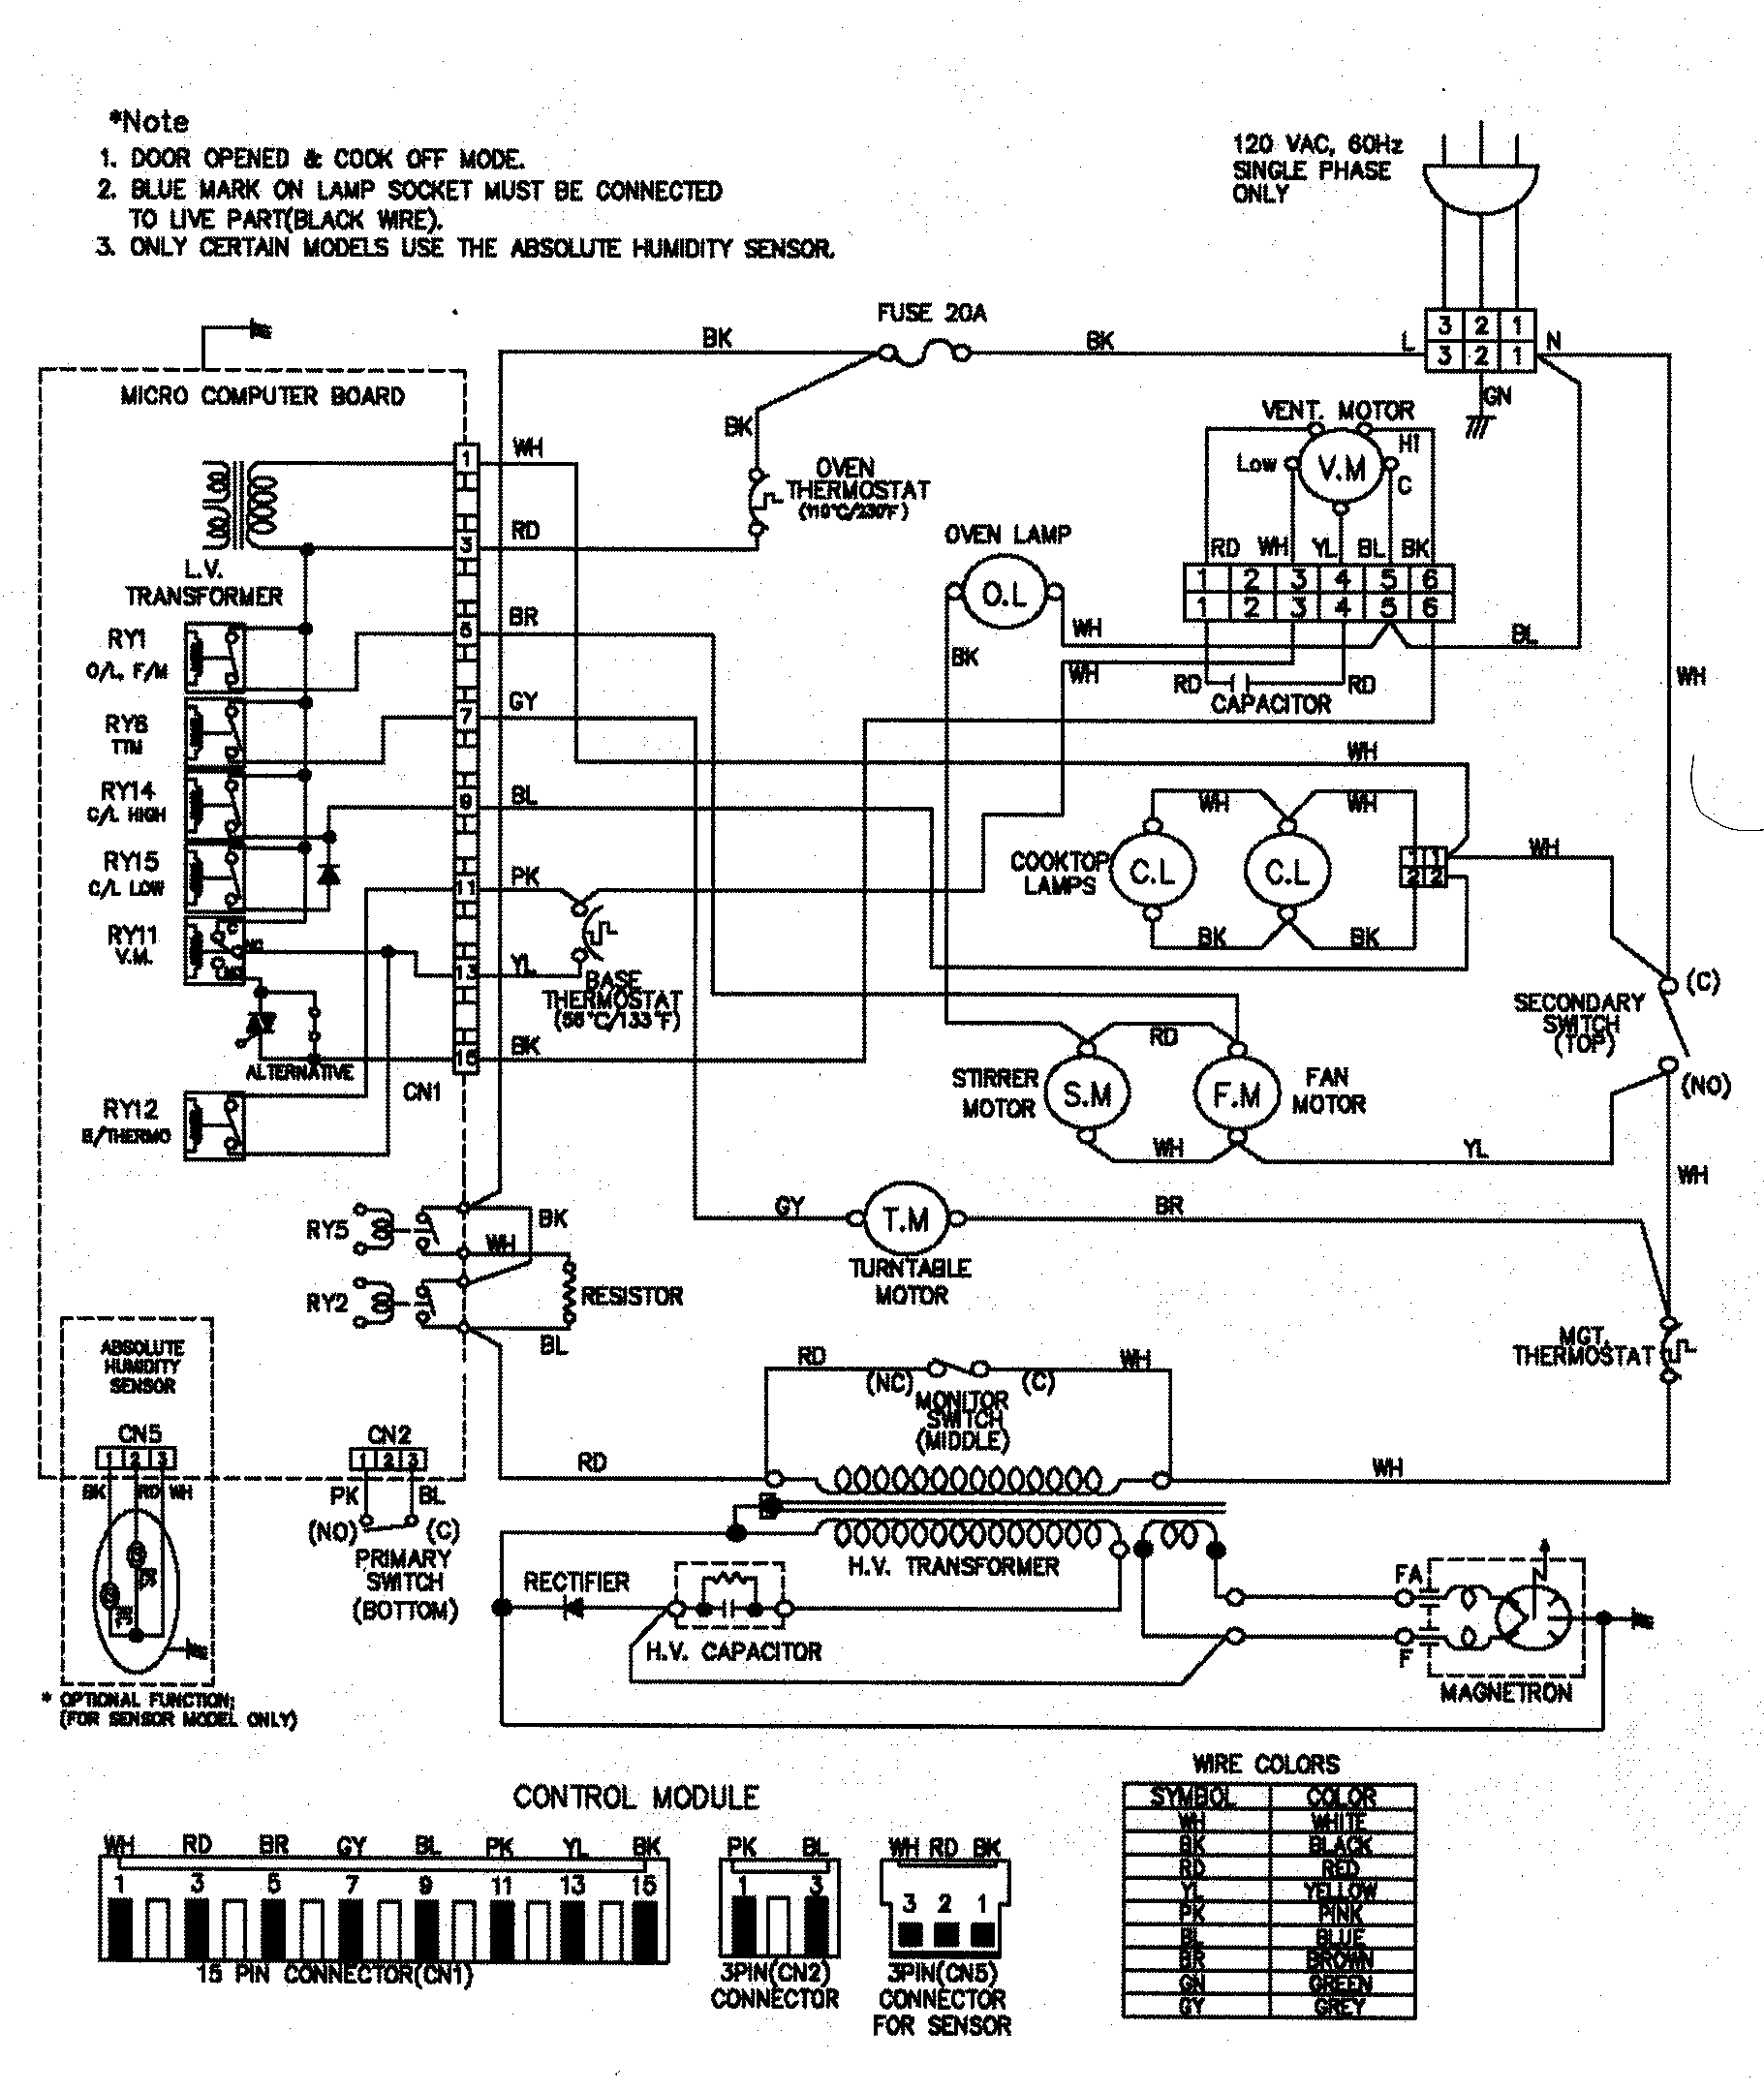 DIAGRAM Wiring Diagram Of A Microwave Oven FULL Version ...